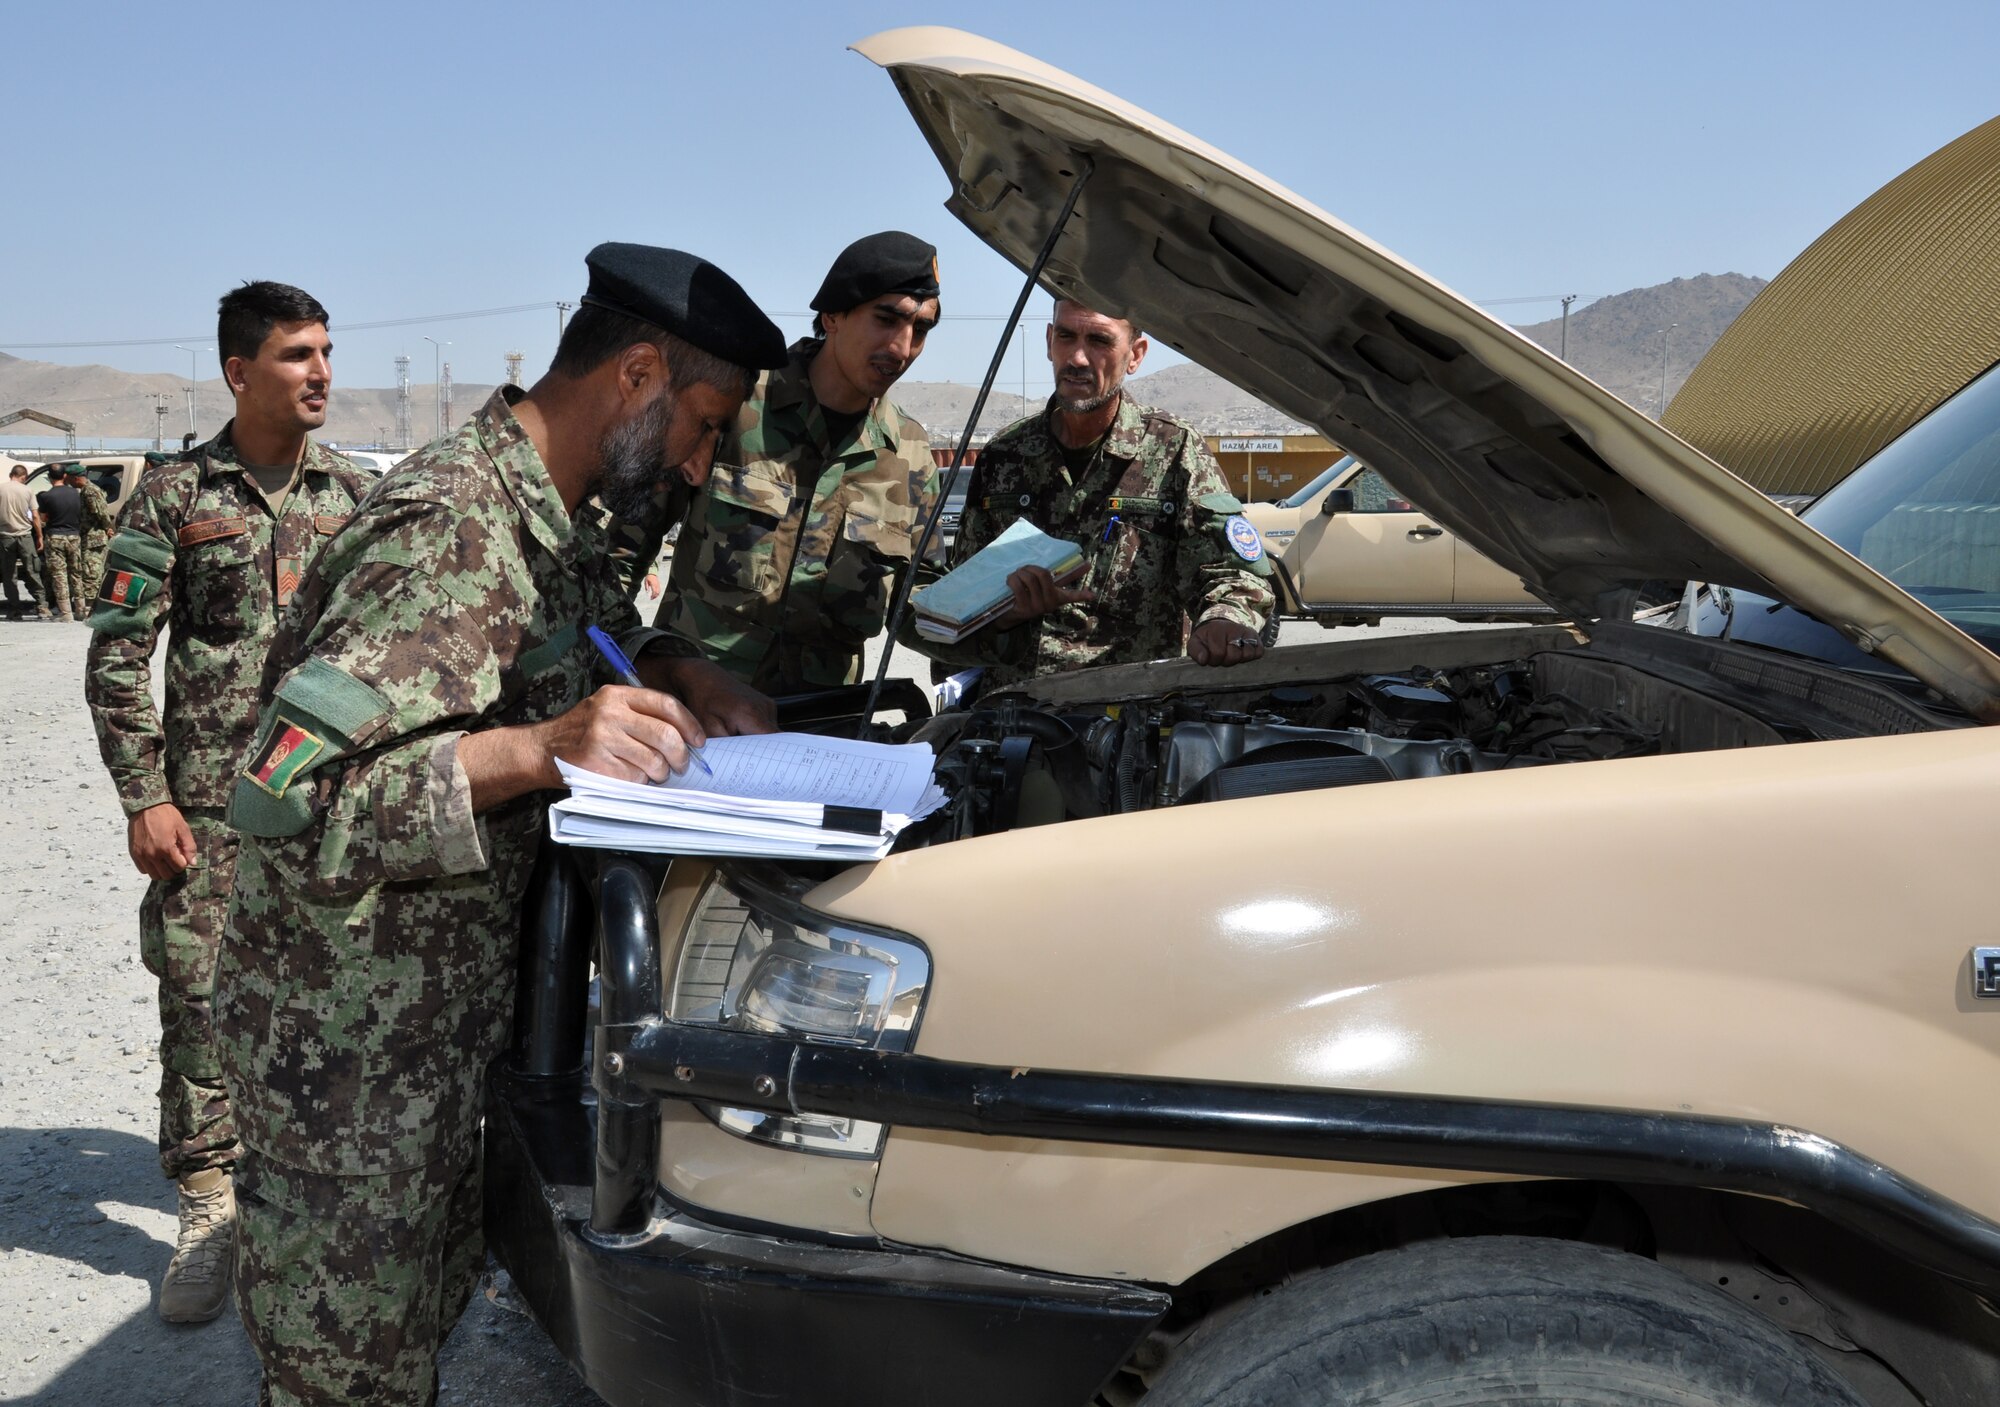 Afghan National Army and Afghan Air Force vehicle maintainers work a checklist during a training session at Kabul Air Wing Aug. 6, 2015. Train, Advise, Assist Command – Air (TAAC-Air) advisors and contractors work to refine Afghan Air Force logistics, reduce new acquisitions and programs, and create a sustainable and capable air force to support the Afghan National Security Forces in the coming years. The Vehicle Maintenance Training Program (VMTP) is one focus area to acquire coalition expertise to provide meaningful instruction on specialized equipment and contractor support to the AAF. They began training June 27, 2015. (U.S. Air Force photo by Capt. Eydie Sakura/Released)